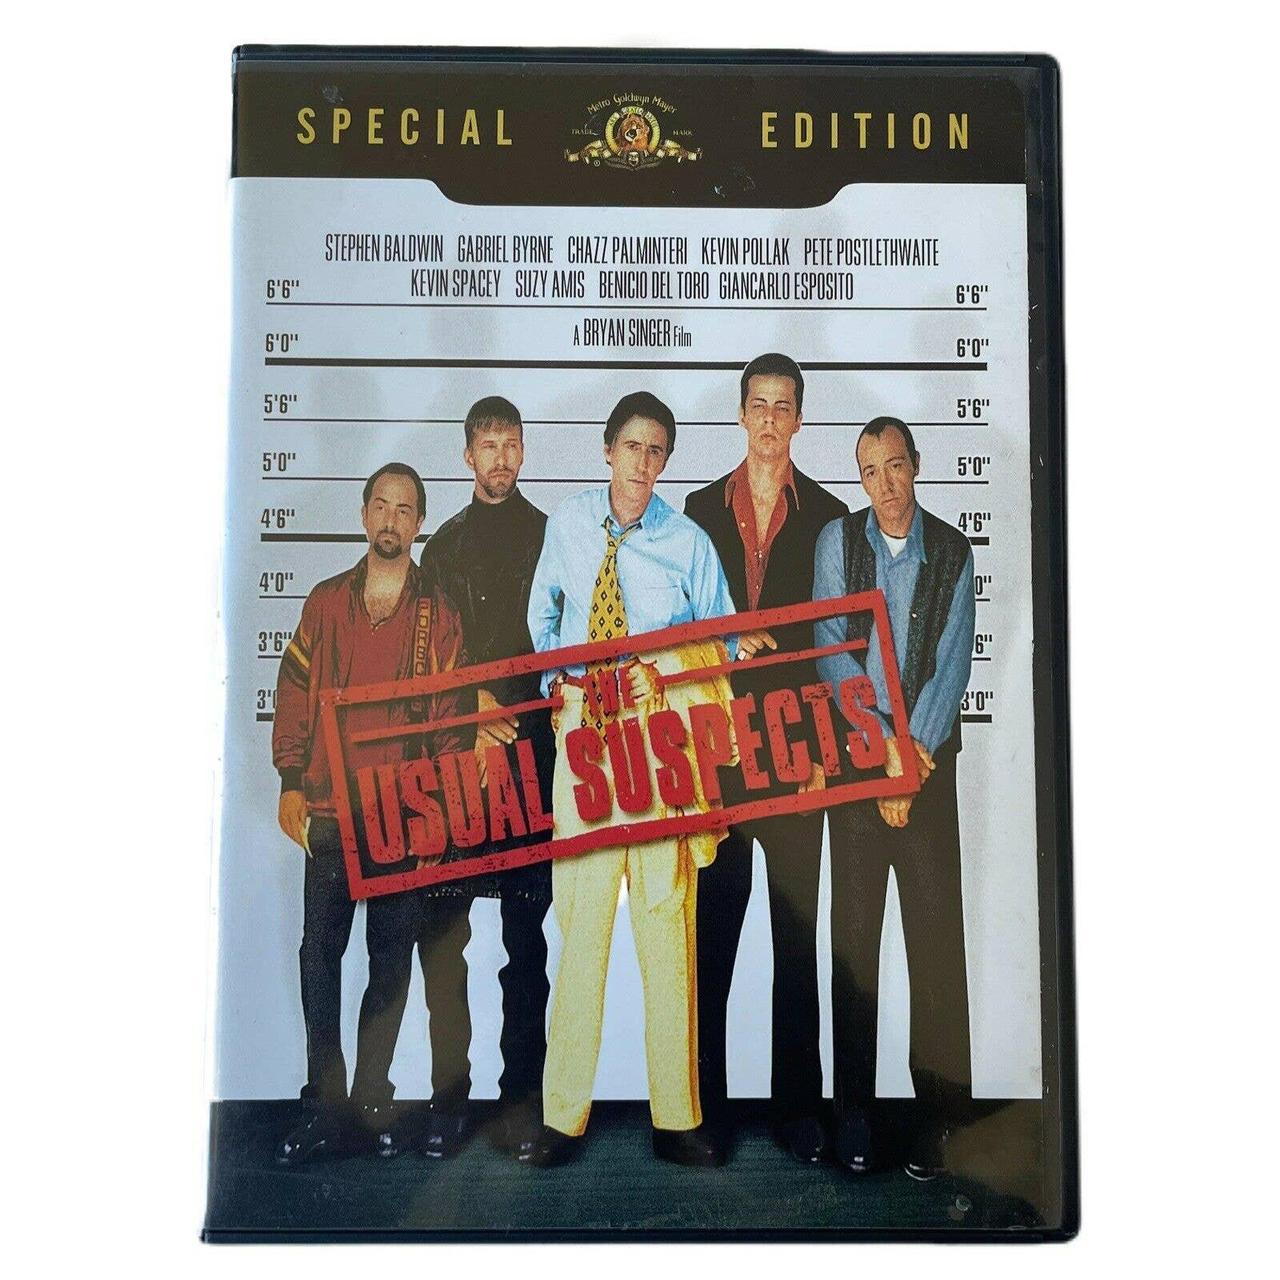 Product Image 1 - The Usual Suspects (DVD, 1999).